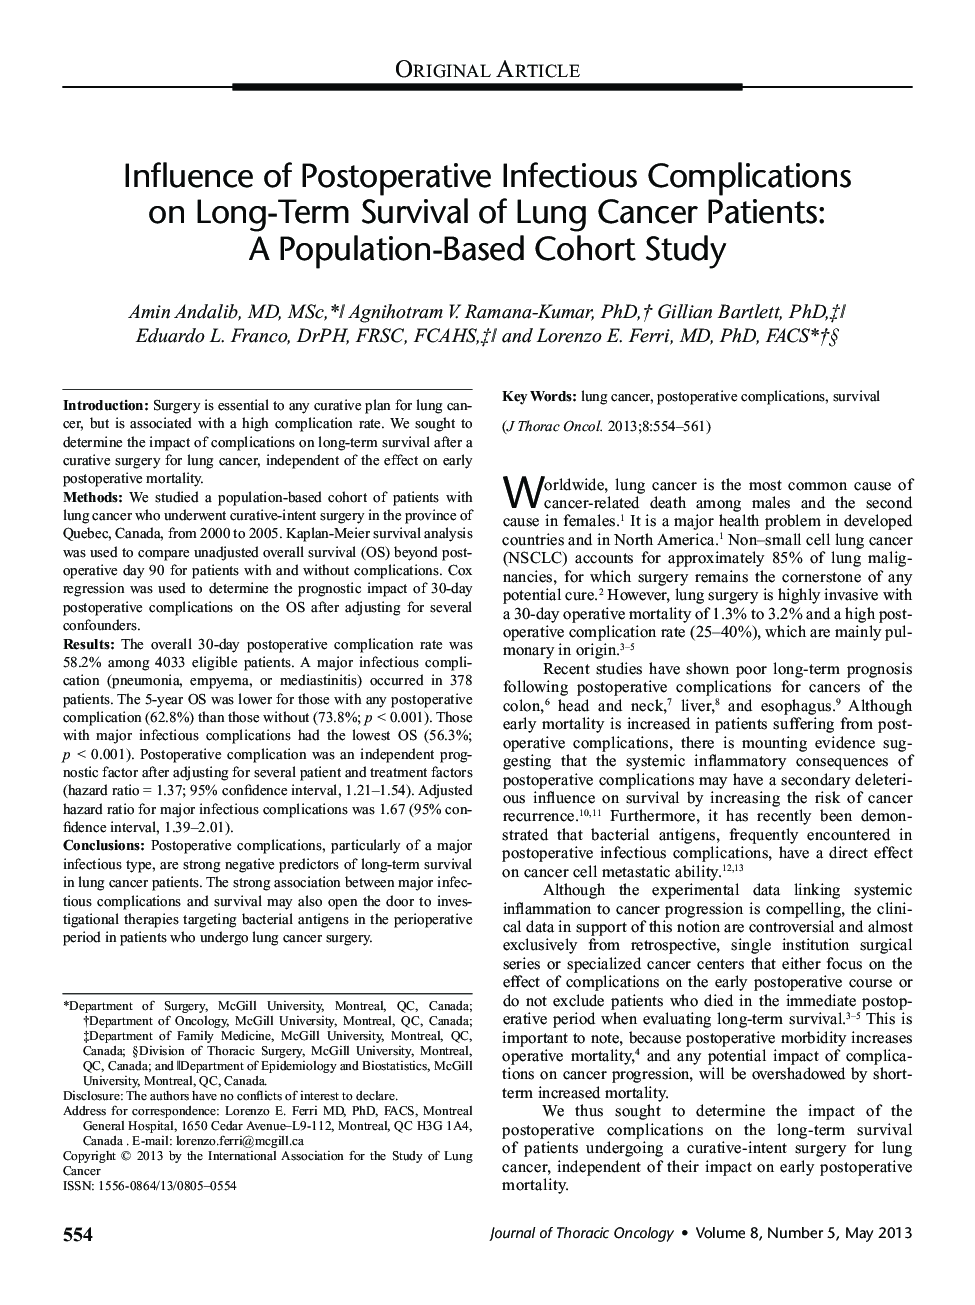 Influence of Postoperative Infectious Complications on Long-Term Survival of Lung Cancer Patients: A Population-Based Cohort Study 